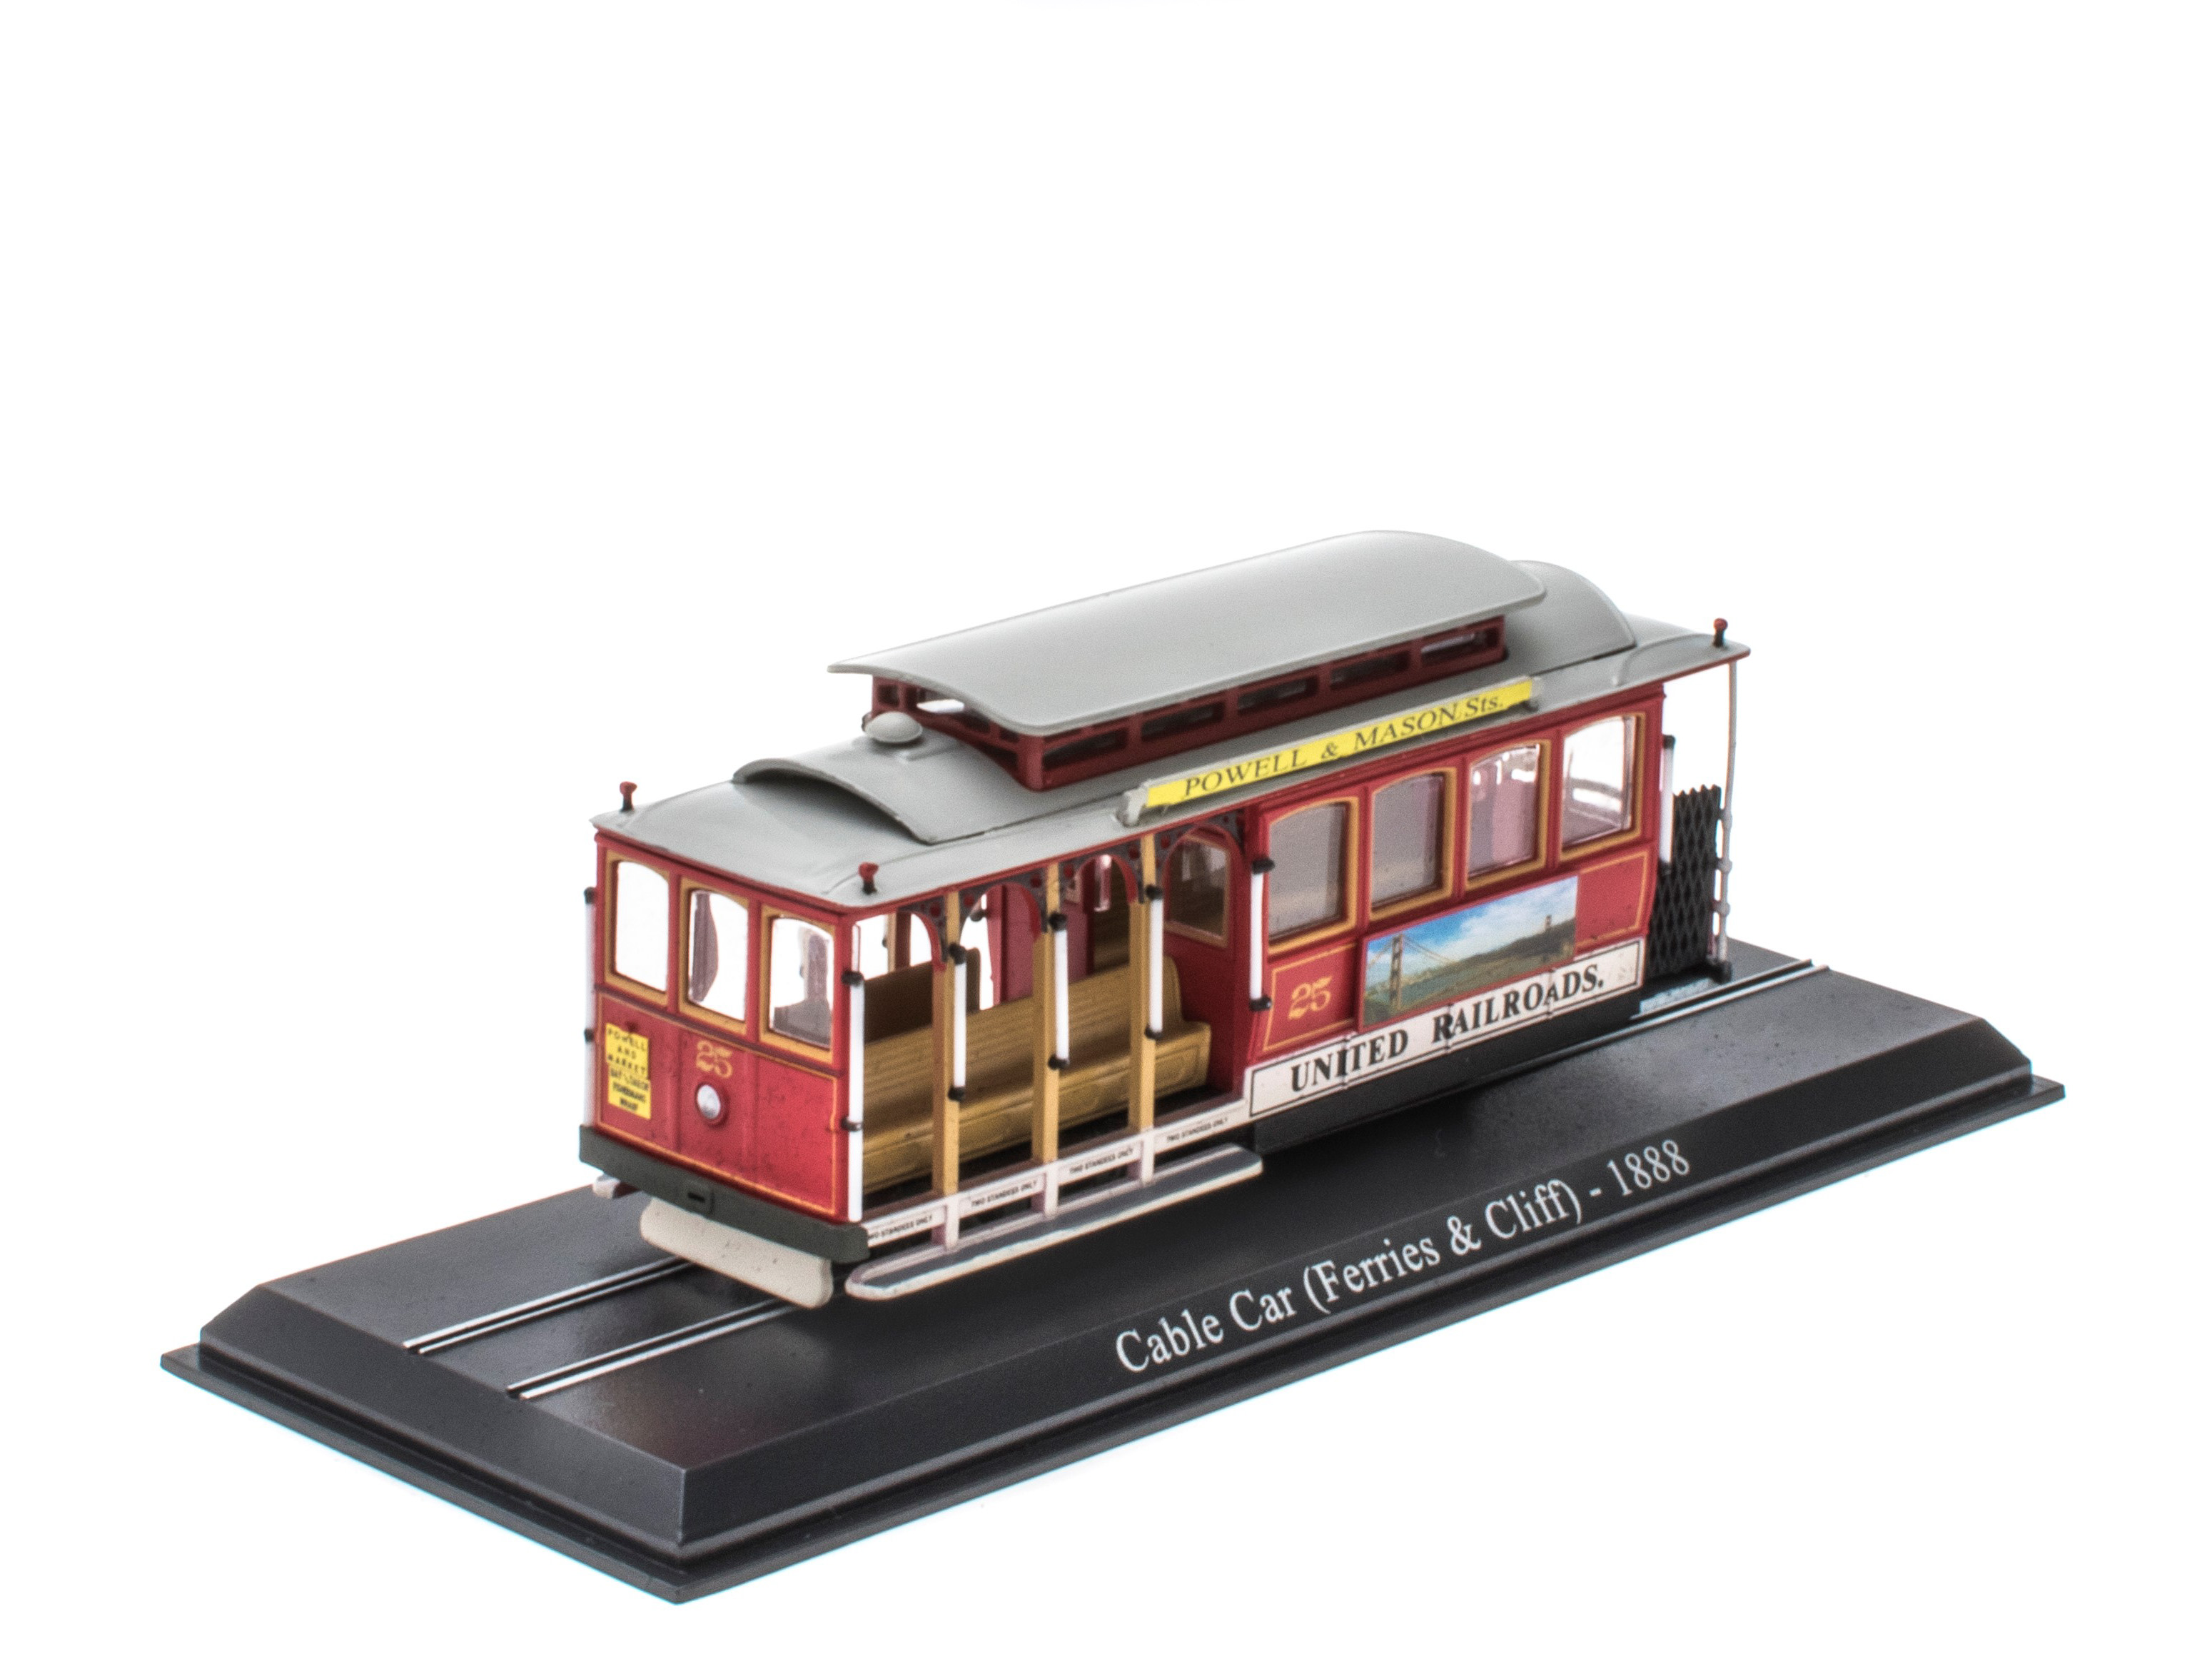 Cable Car (Ferries & Cliff) - San Francisco 1888 - Limited Edition